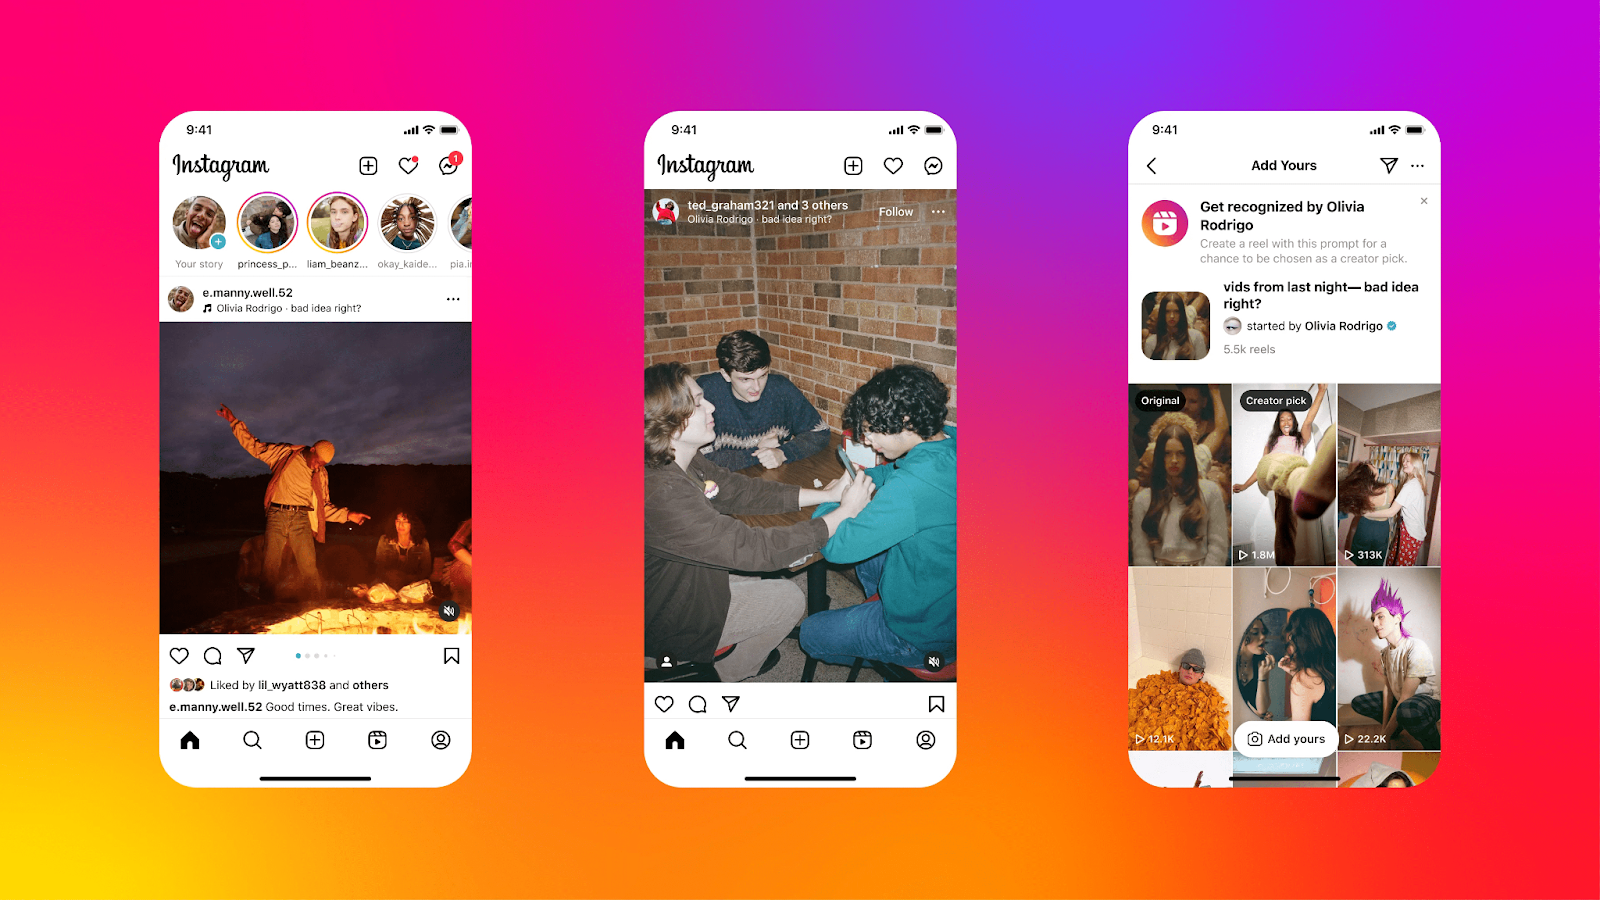 Instagram Introduces New Music Features: Soundtracks and Collaborative Posts